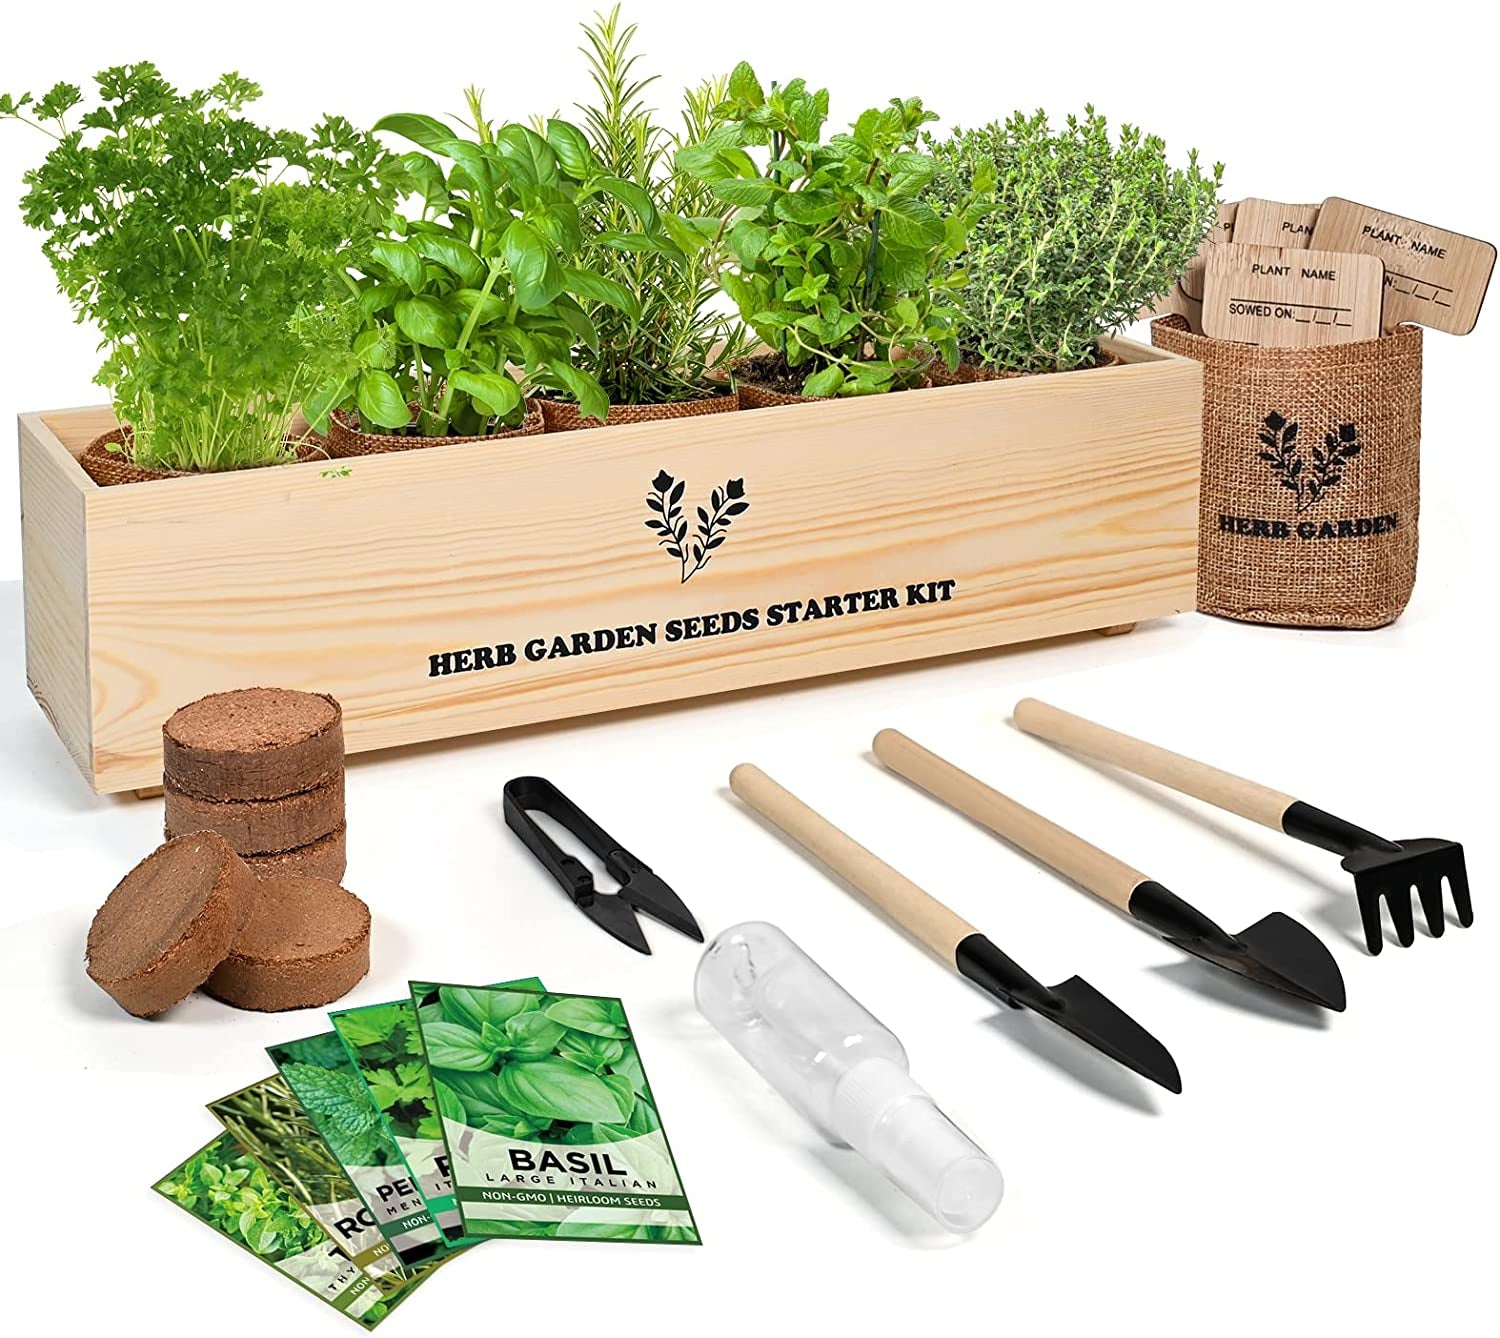 Indoor Herb Grow Kit, 5 Herb Seeds Garden Starter Kit with Complete Planting Kit & Wooden Flower Box, Growing into Basil, Parsley, Rosemary, Thyme, Mint for Kitchen Windowsill Herb Garden DIY